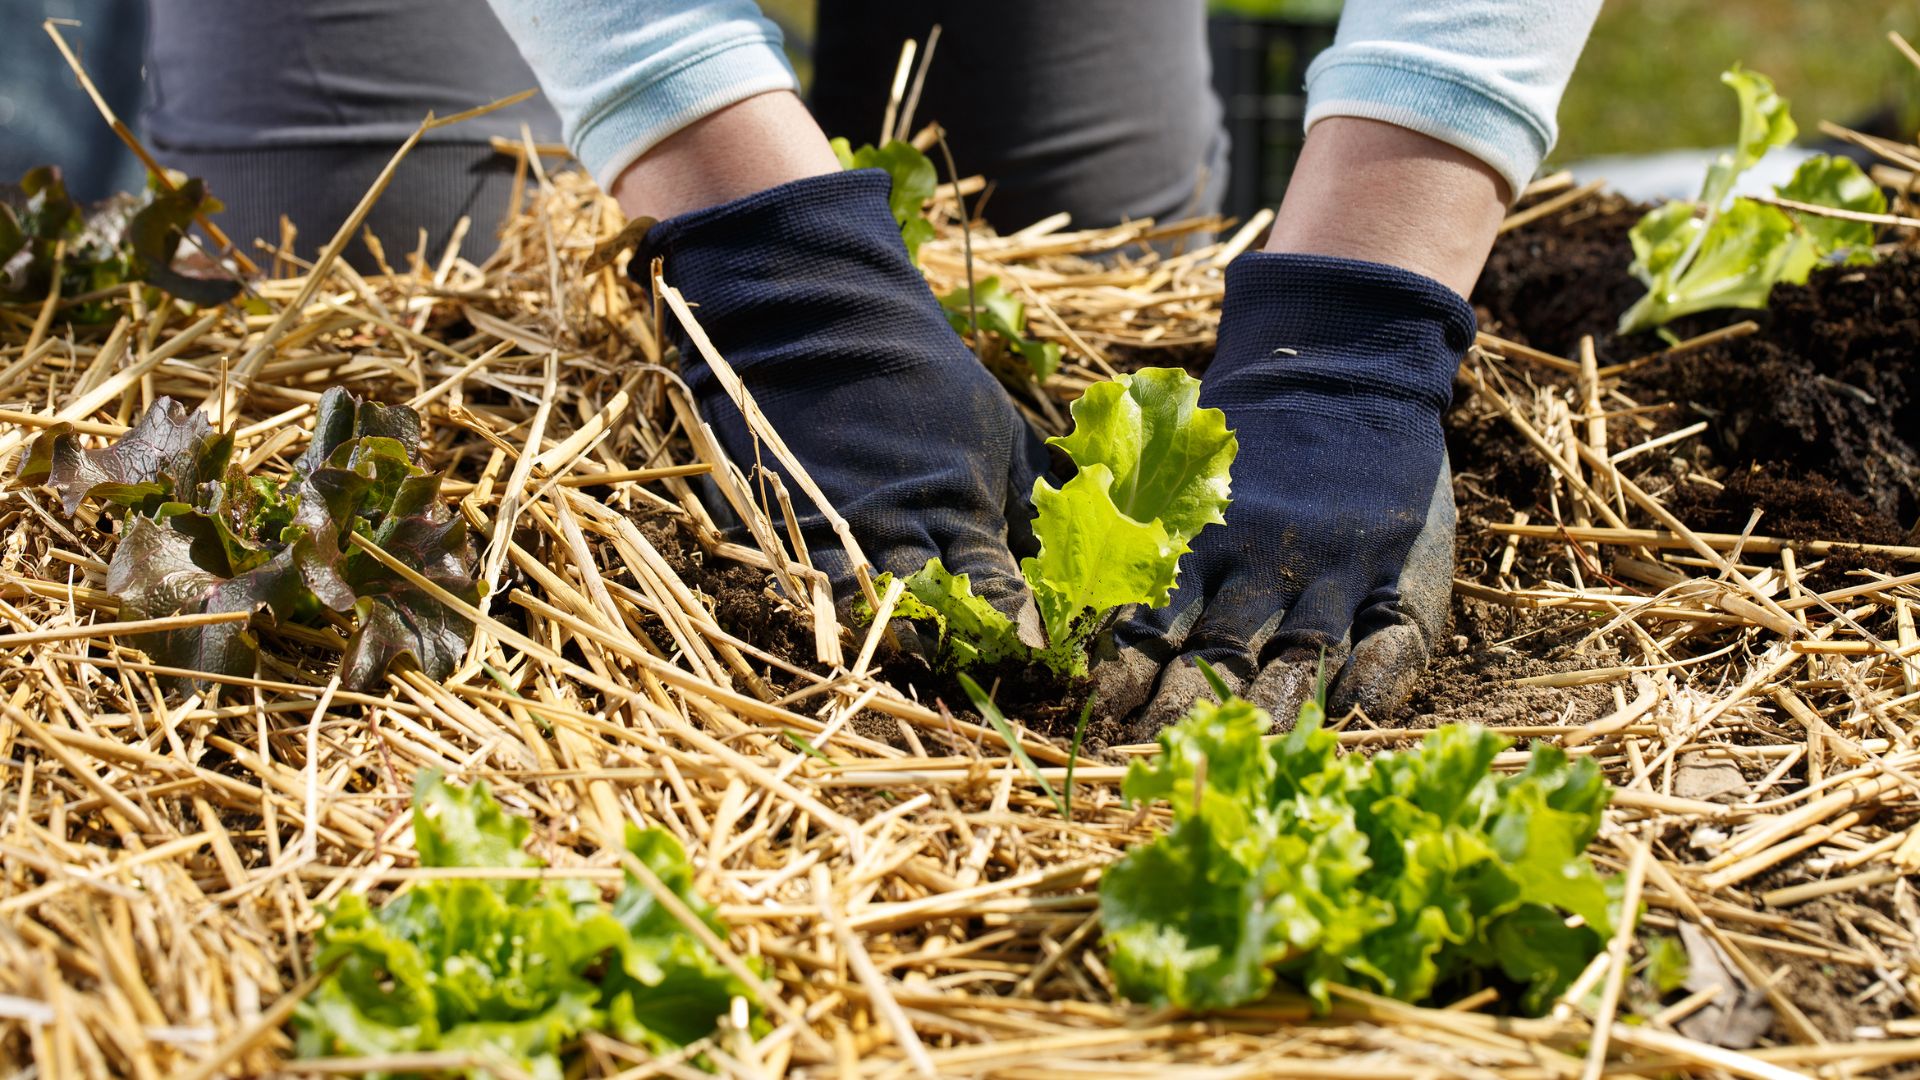 What Is The Best Mulch For A Vegetable Garden?